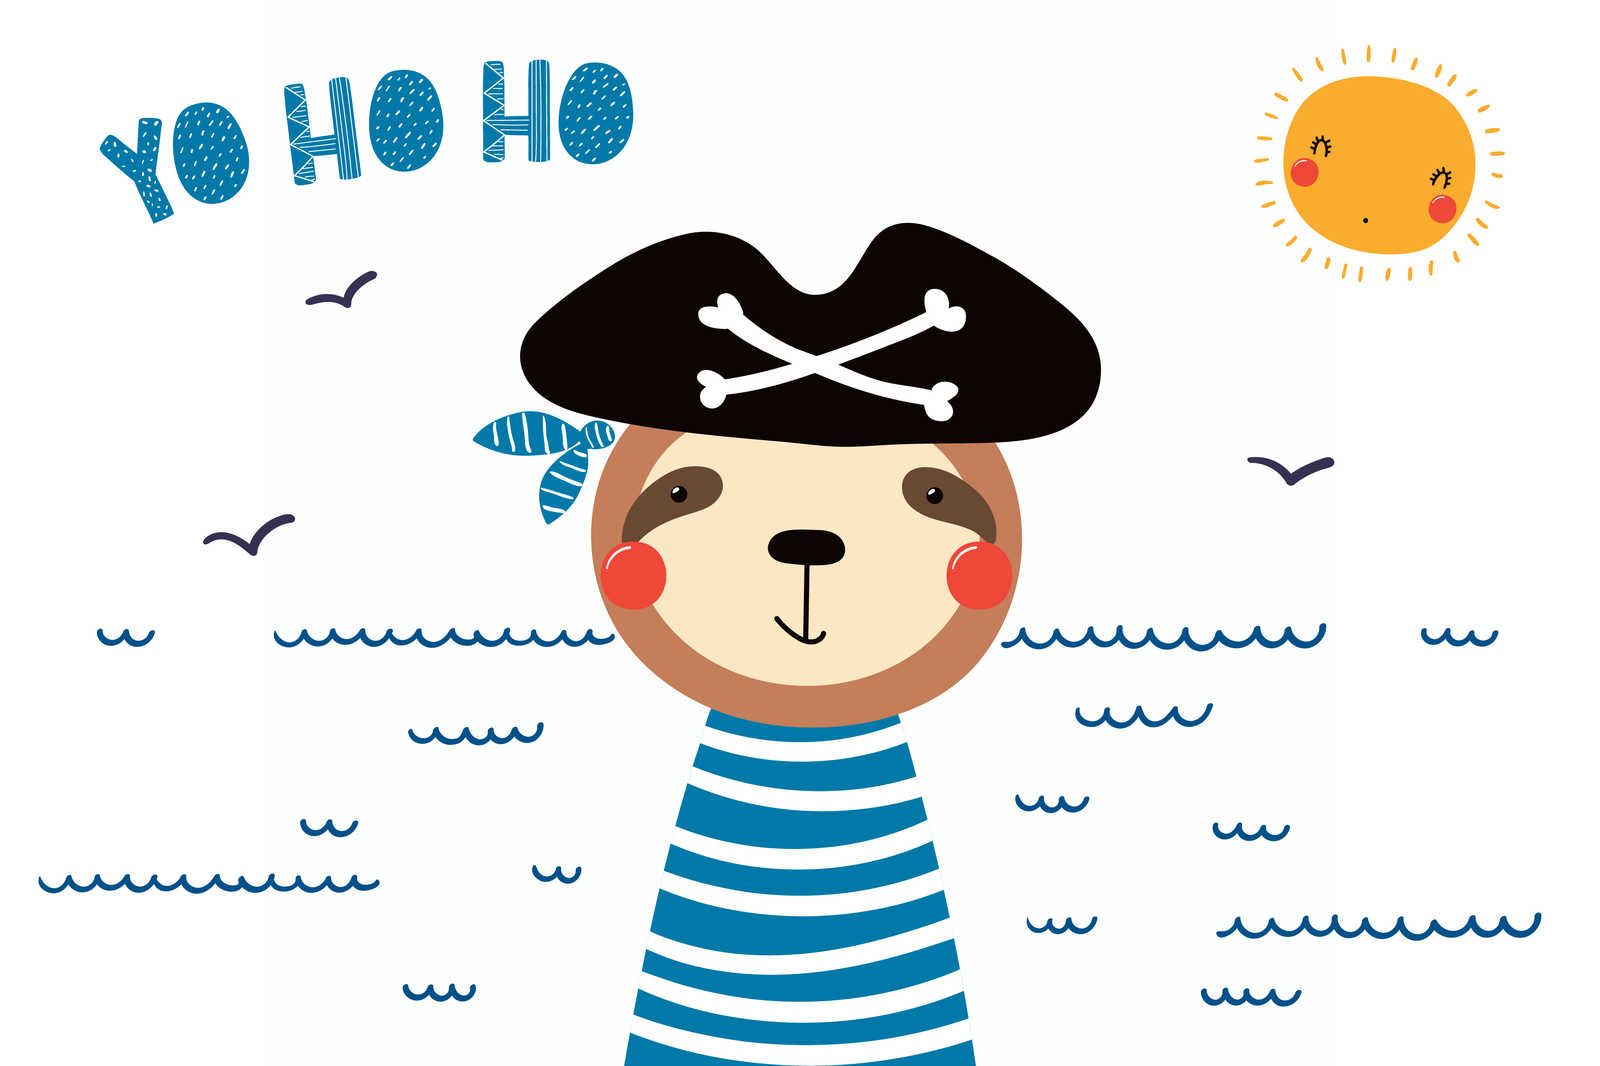             Canvas for children's room with bear pirate - 90 cm x 60 cm
        